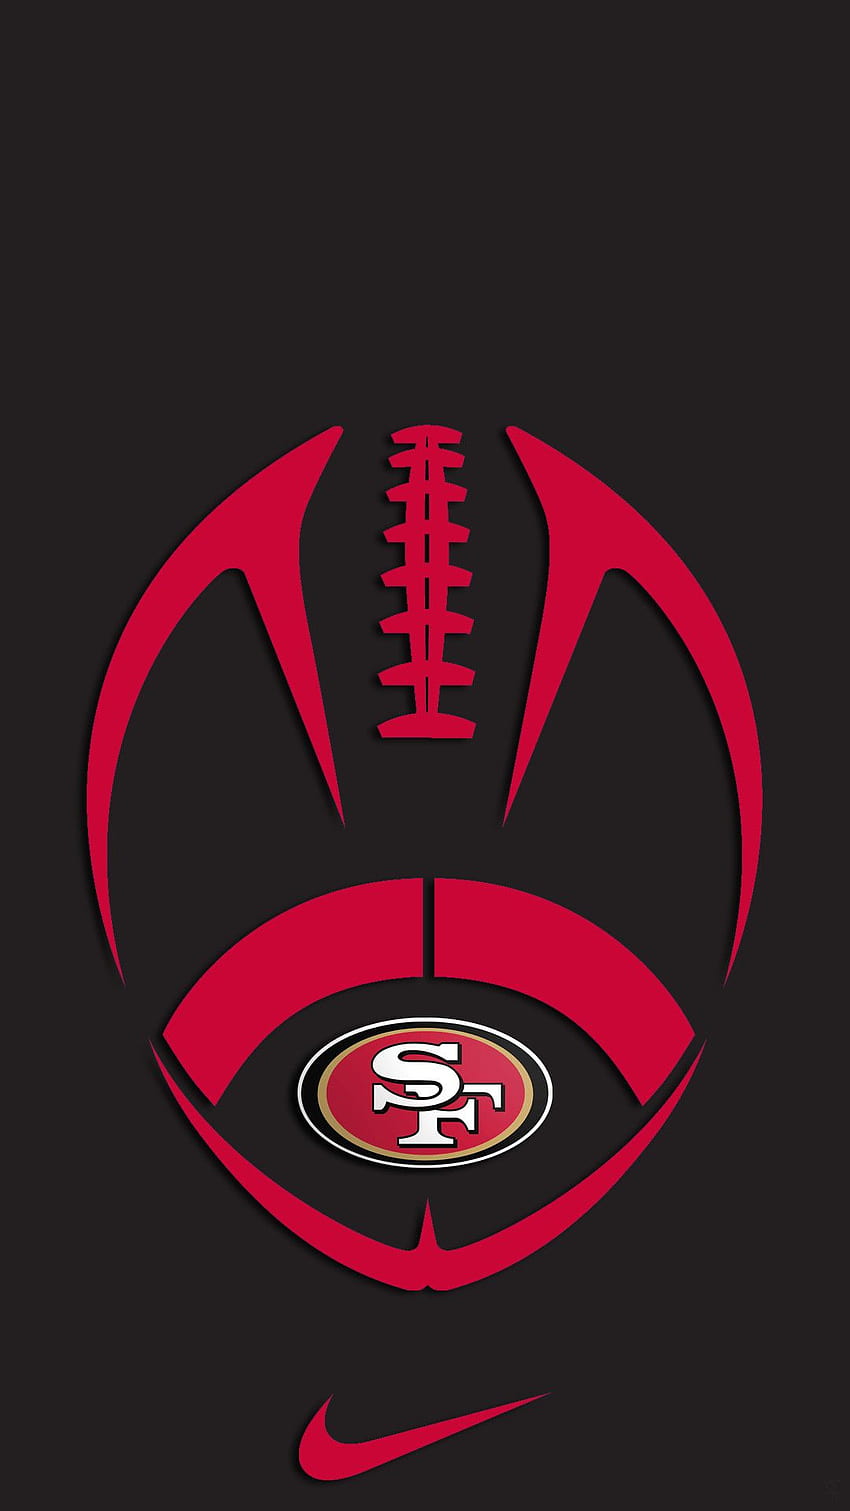 Download San Francisco Players Poster 49ers iPhone Wallpaper  Wallpapers com